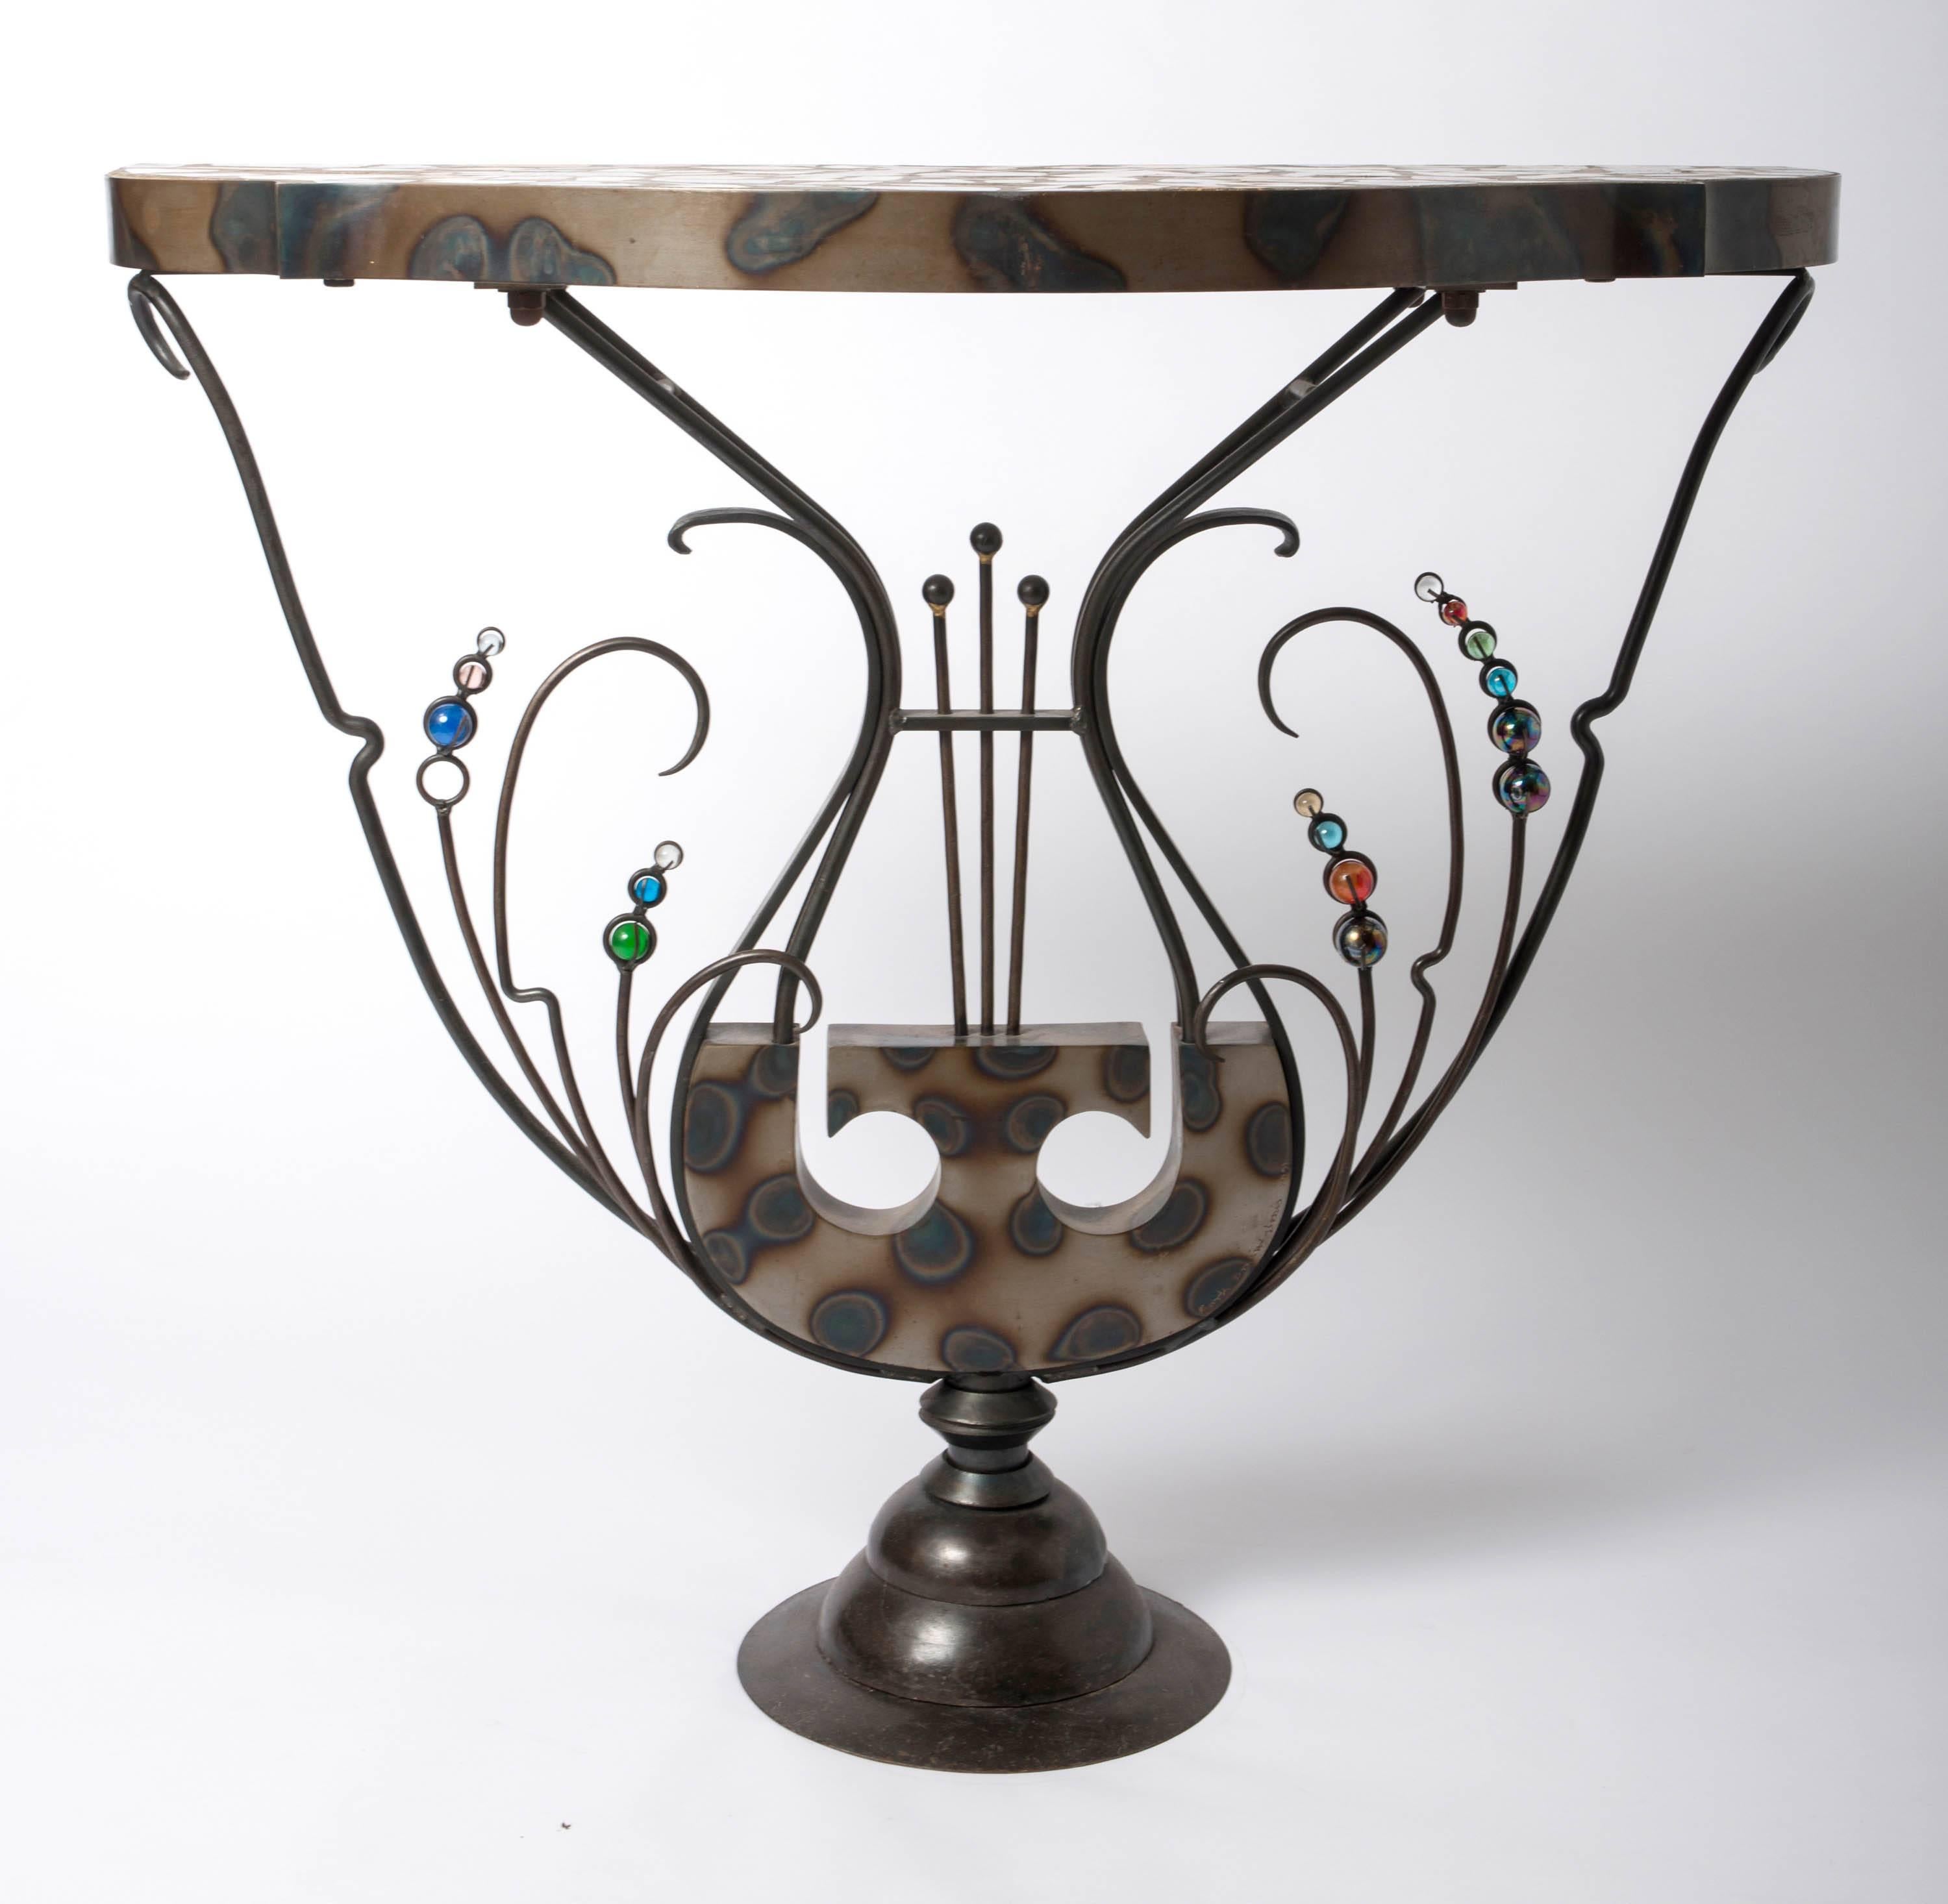 A “Lyra” console table, by Mark Brazier-Jones.
Forged iron, burnt metal, glass balls, various marble fragments embedded in cement.
Incised signature- “Mark Brazier-Jones 1991,”
England 1991
Measure: H 90 cms, W 103 cms, D 48 cms.
Provenance;